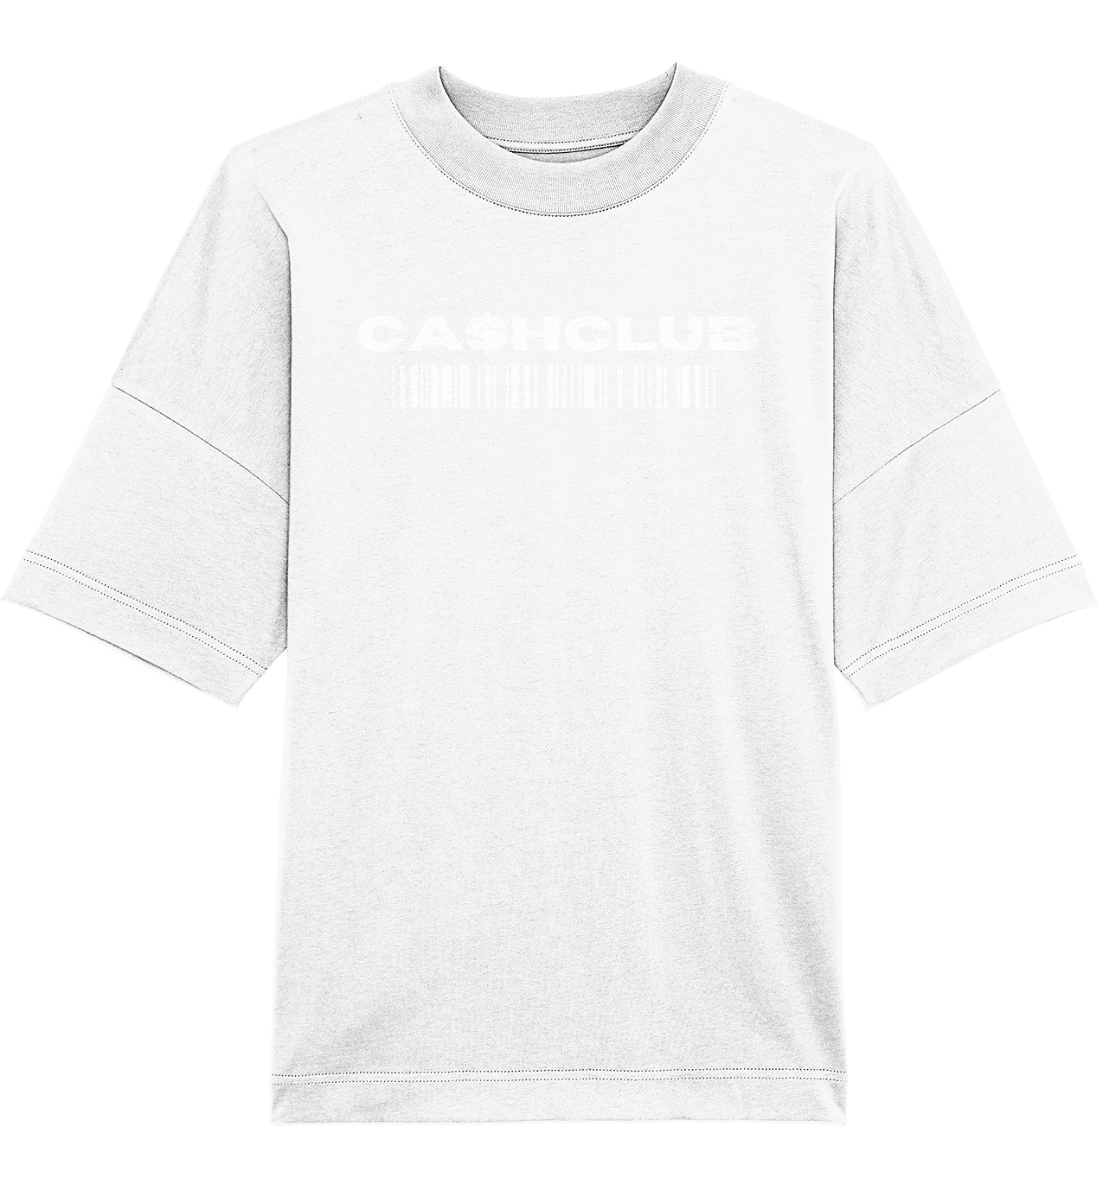 CA$H CLUB COLLECTION by LIMITLOS - Organic Oversize Shirt